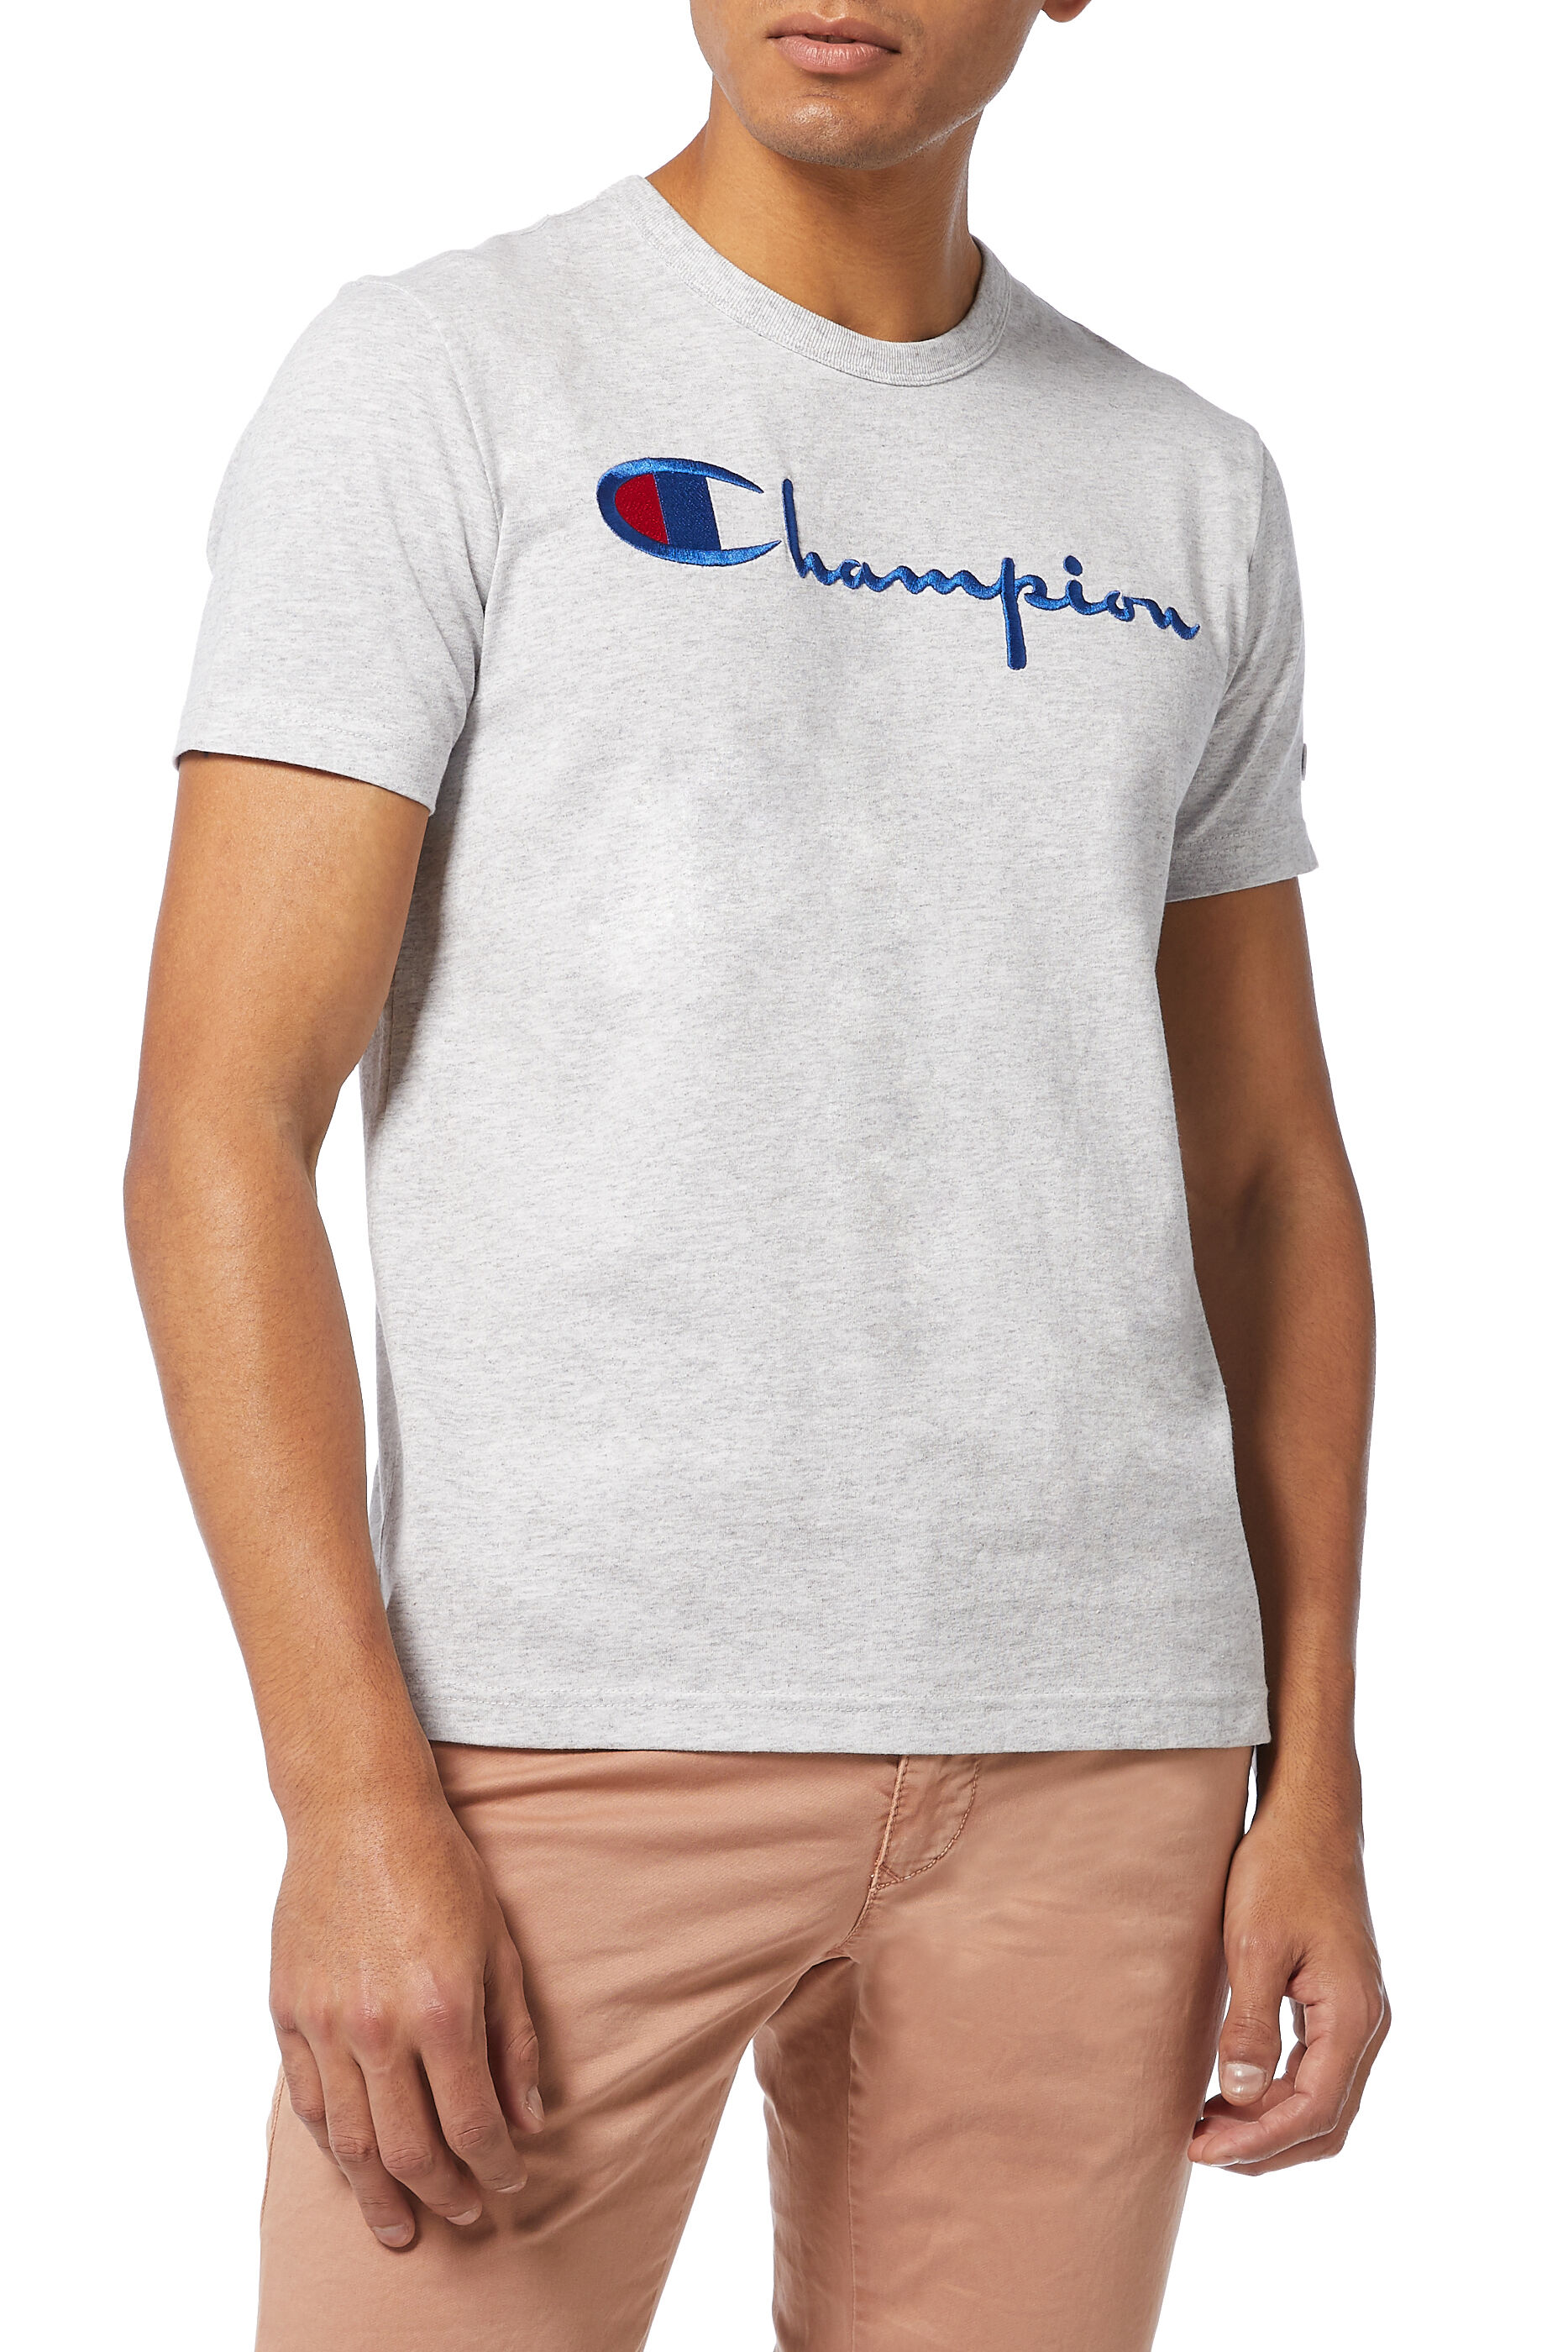 stores that carry champion clothing